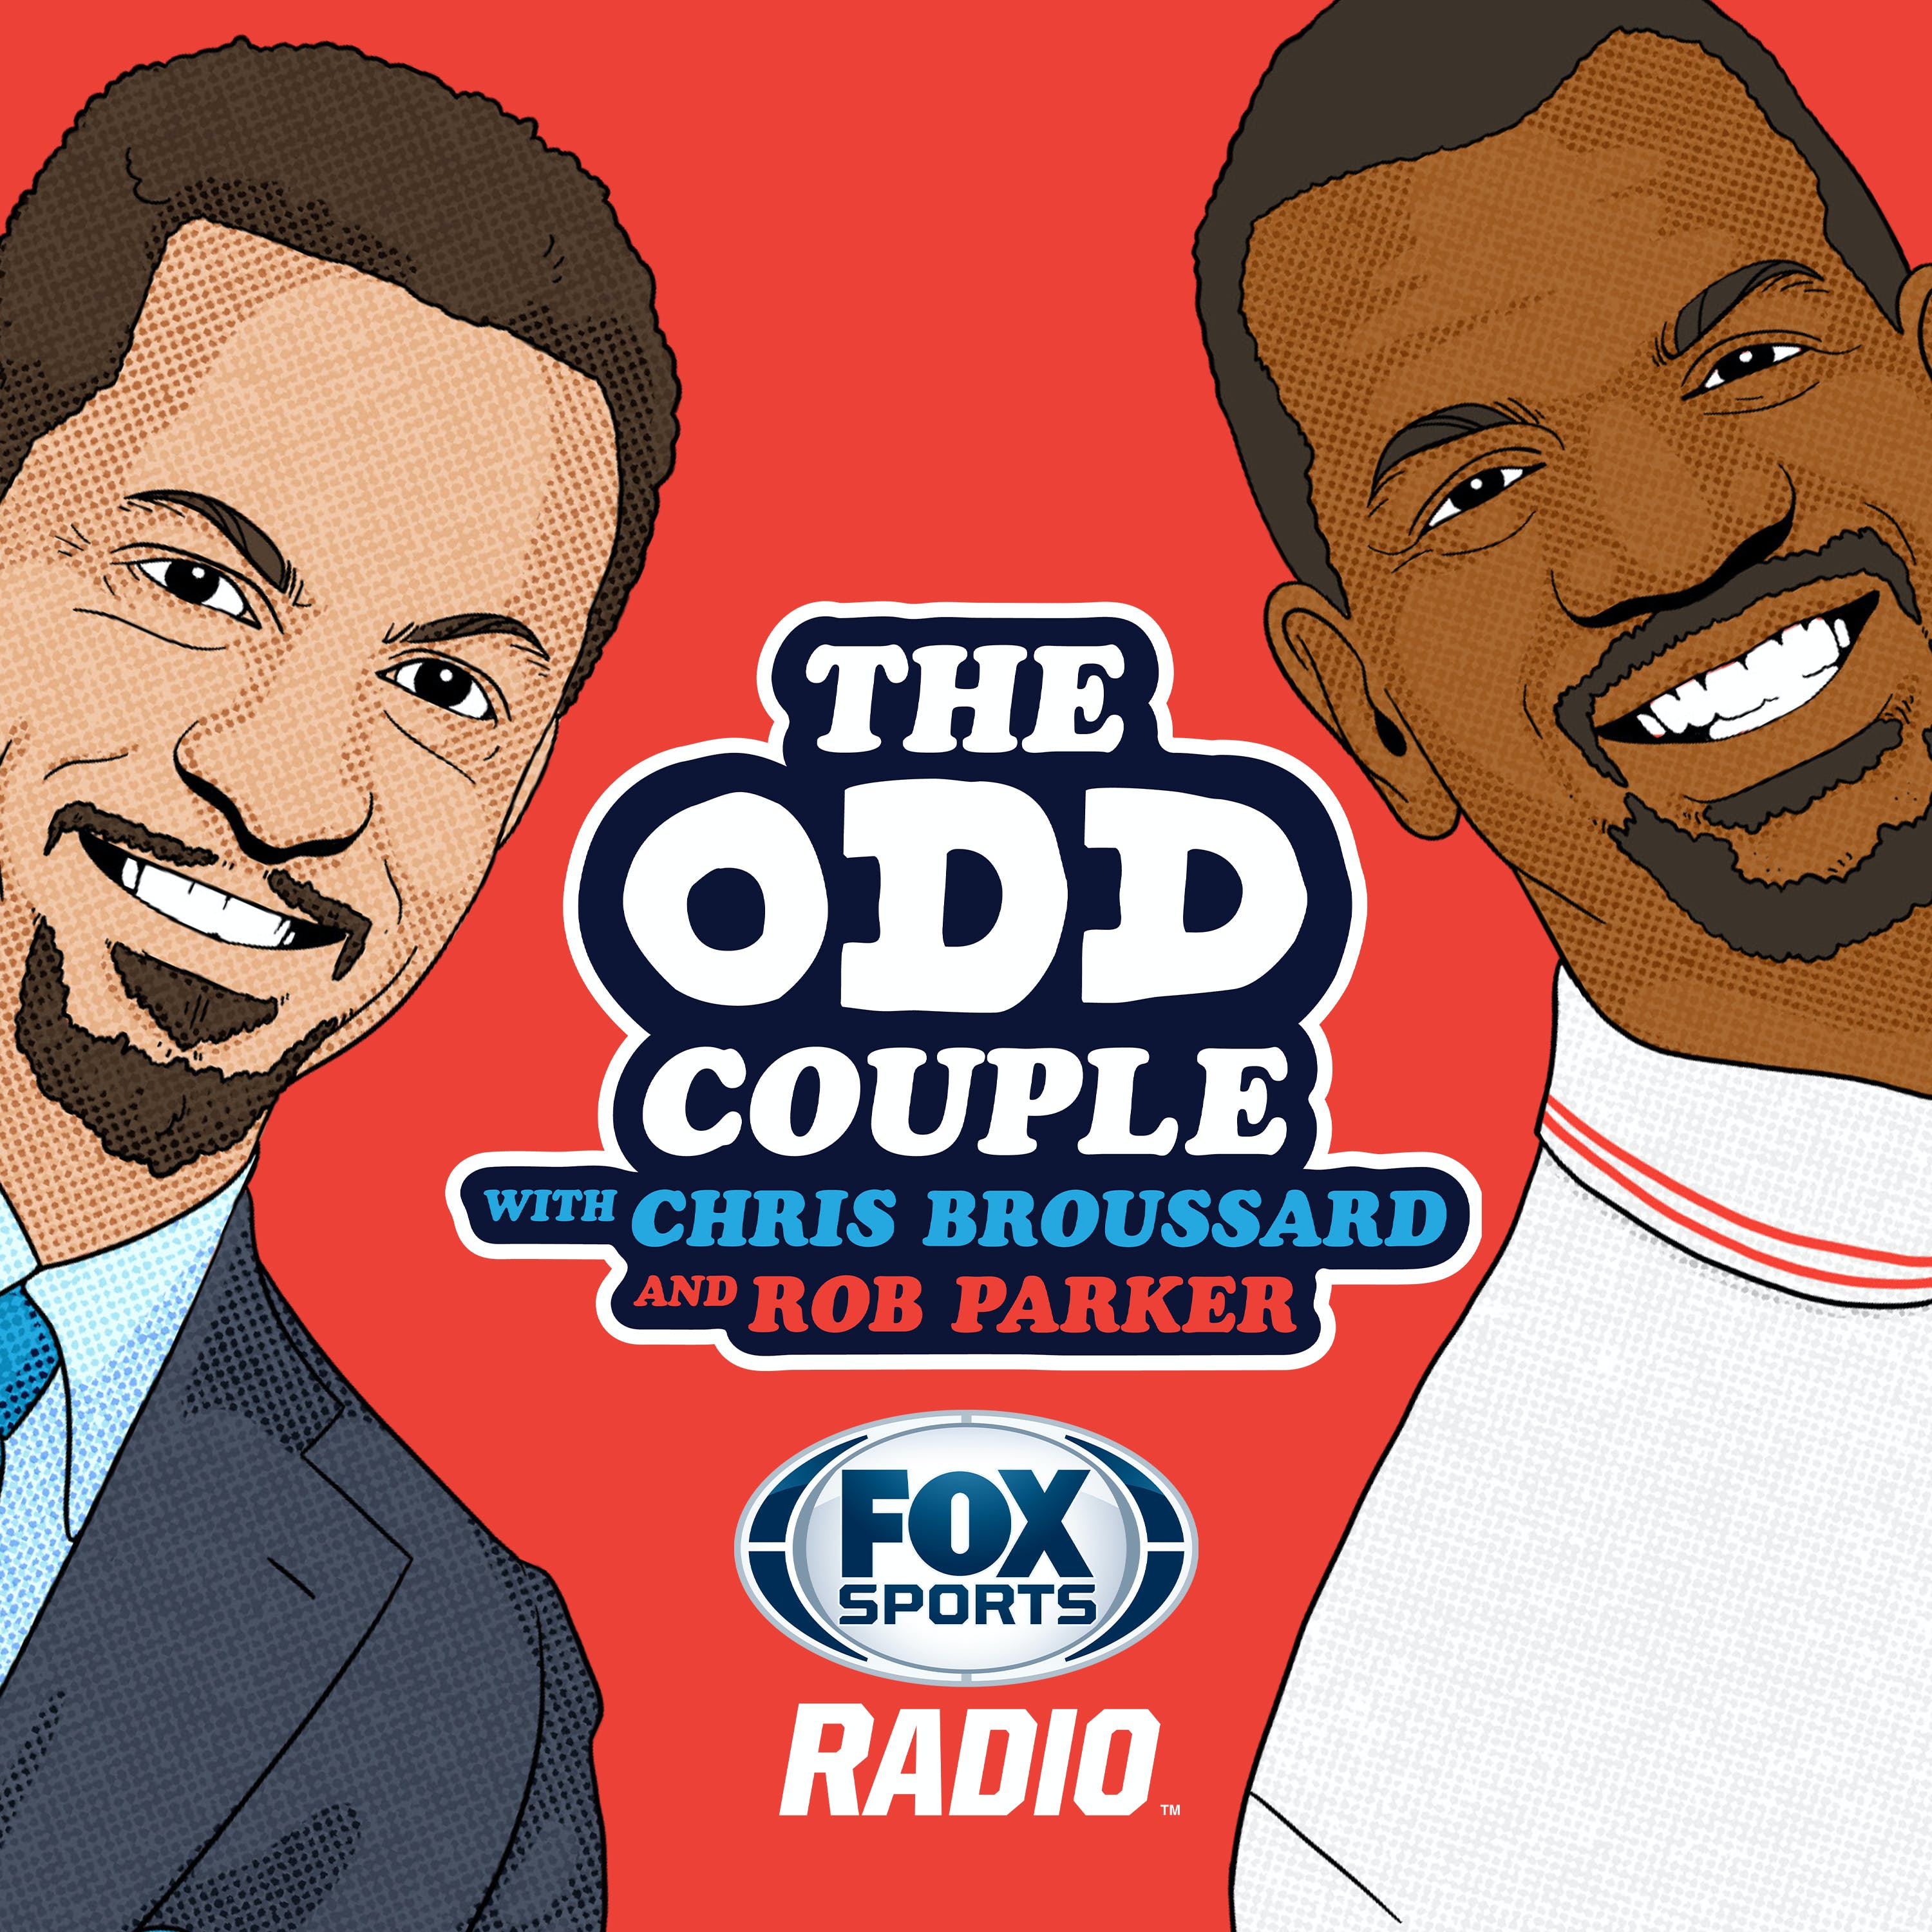 06/10/2021 - Best of The Odd Couple